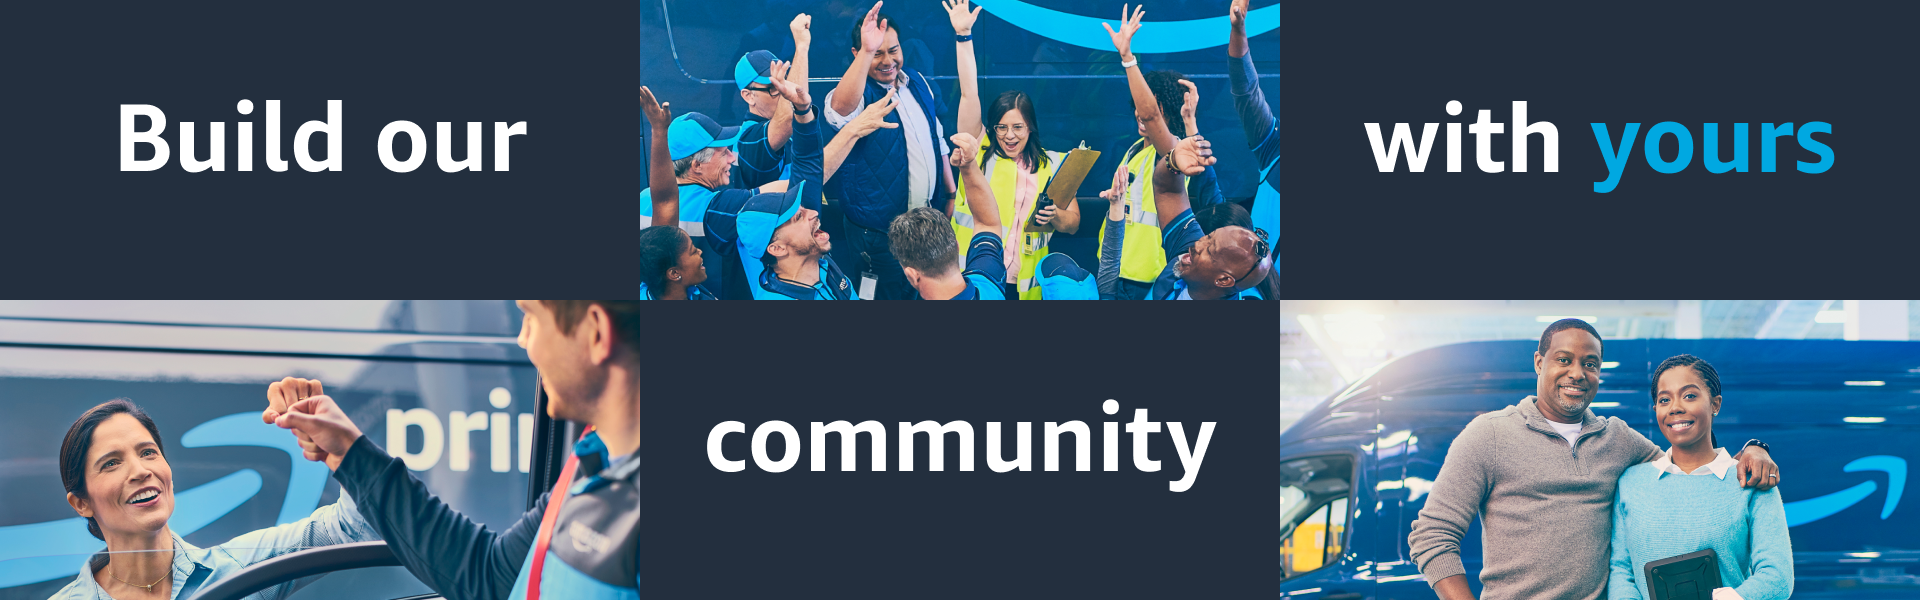 Build our community with yours.